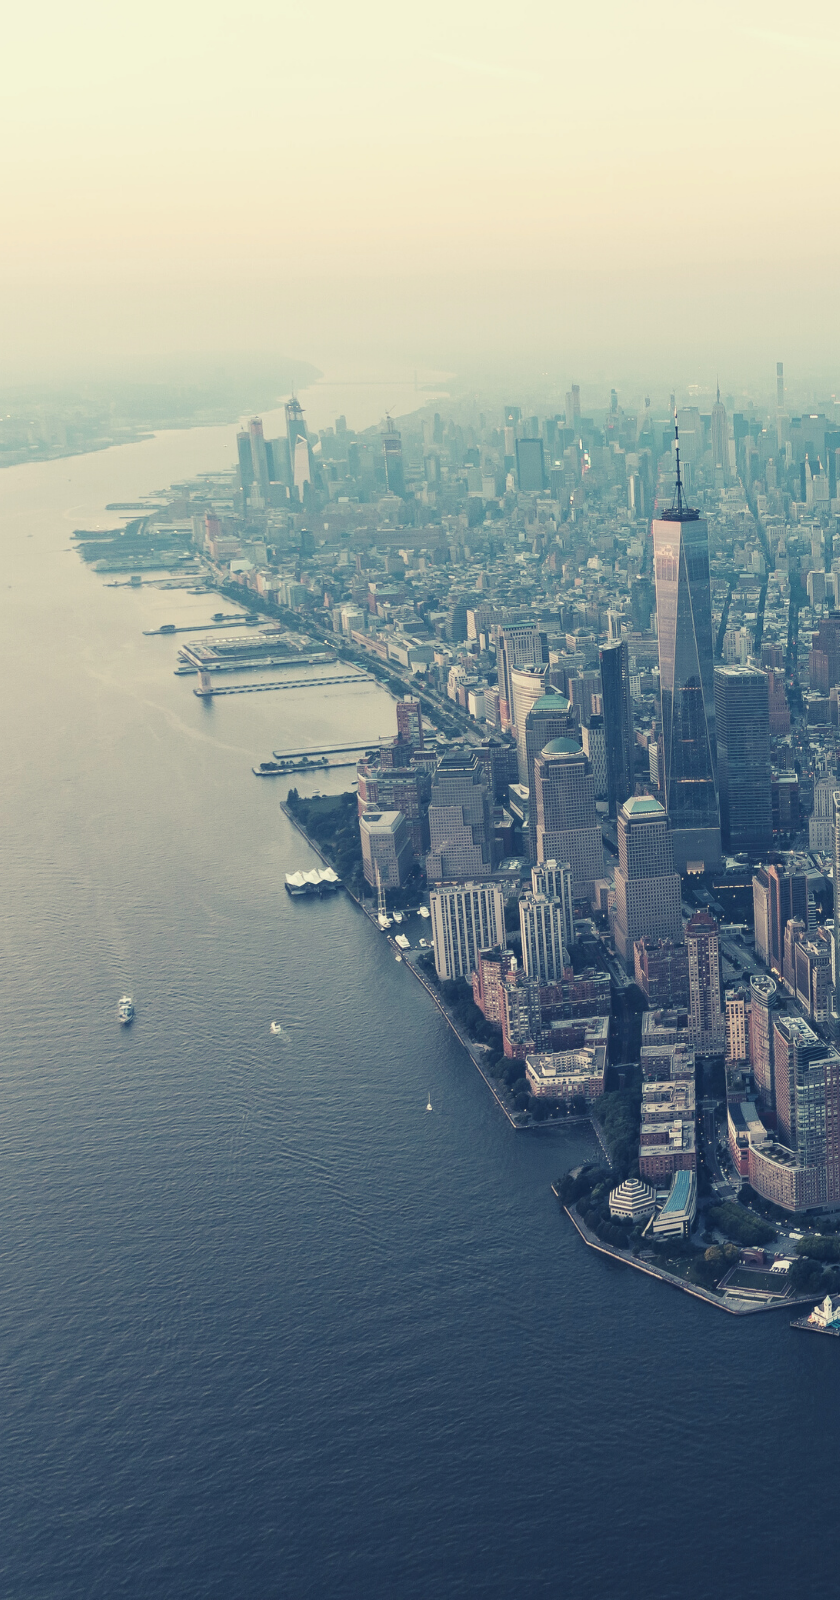 The best New York City wallpaper to download free for iPhone. City wallpaper, City tumblr, New york picture